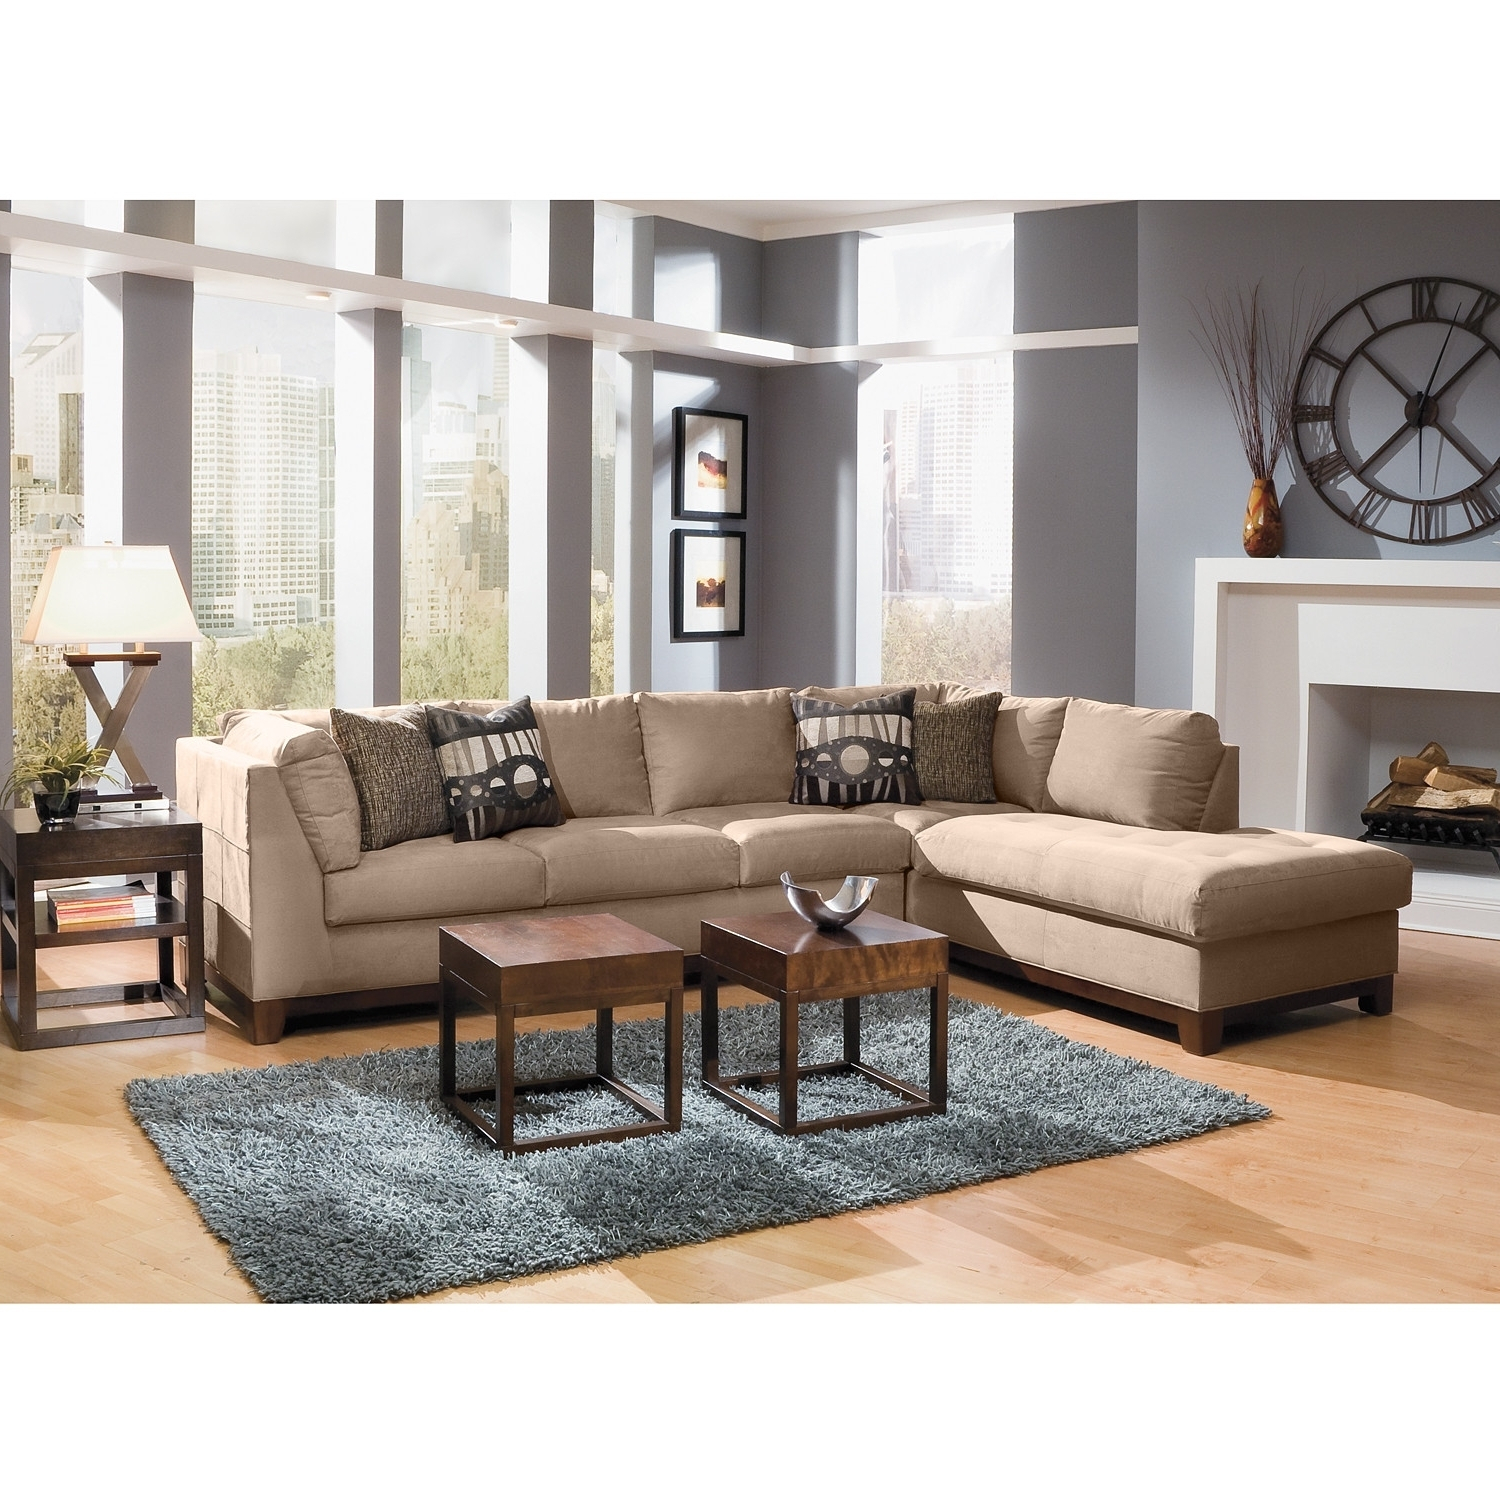 20 Collection Of Sectional Sofas In Greensboro Nc intended for American Furniture Greensboro Nc